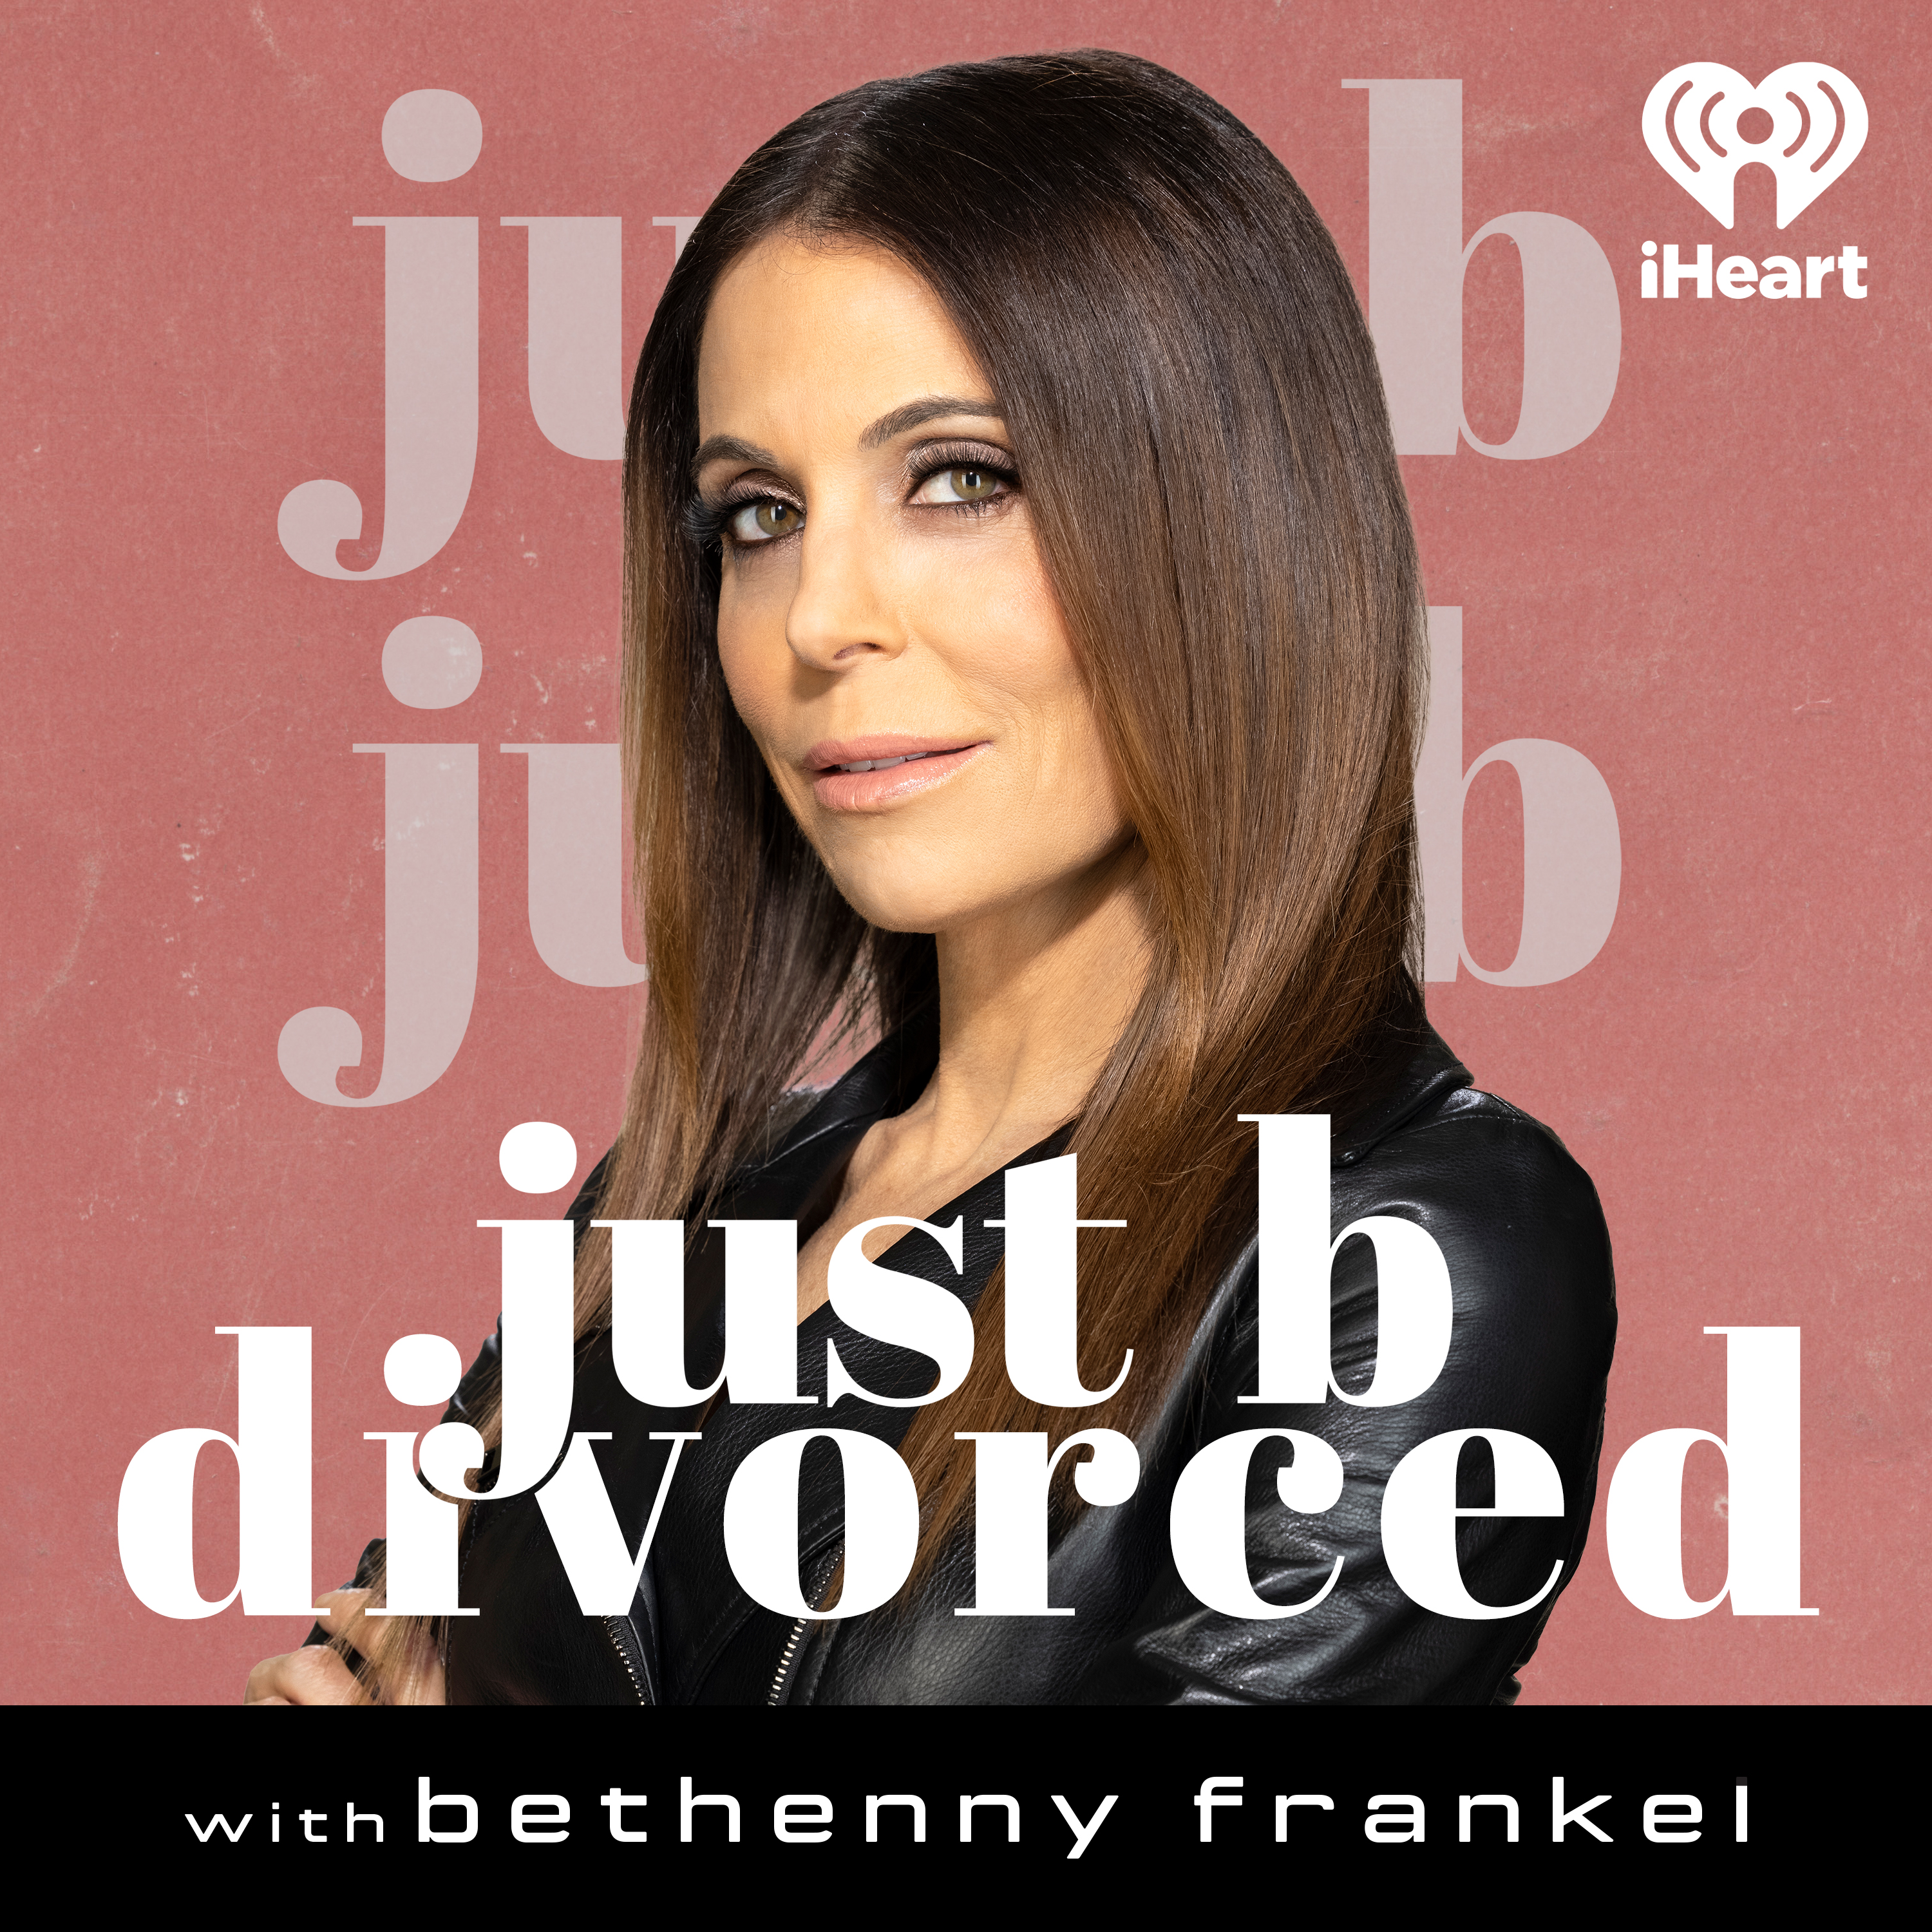 “I want a divorce" with Cheryl Burke by iHeartPodcasts